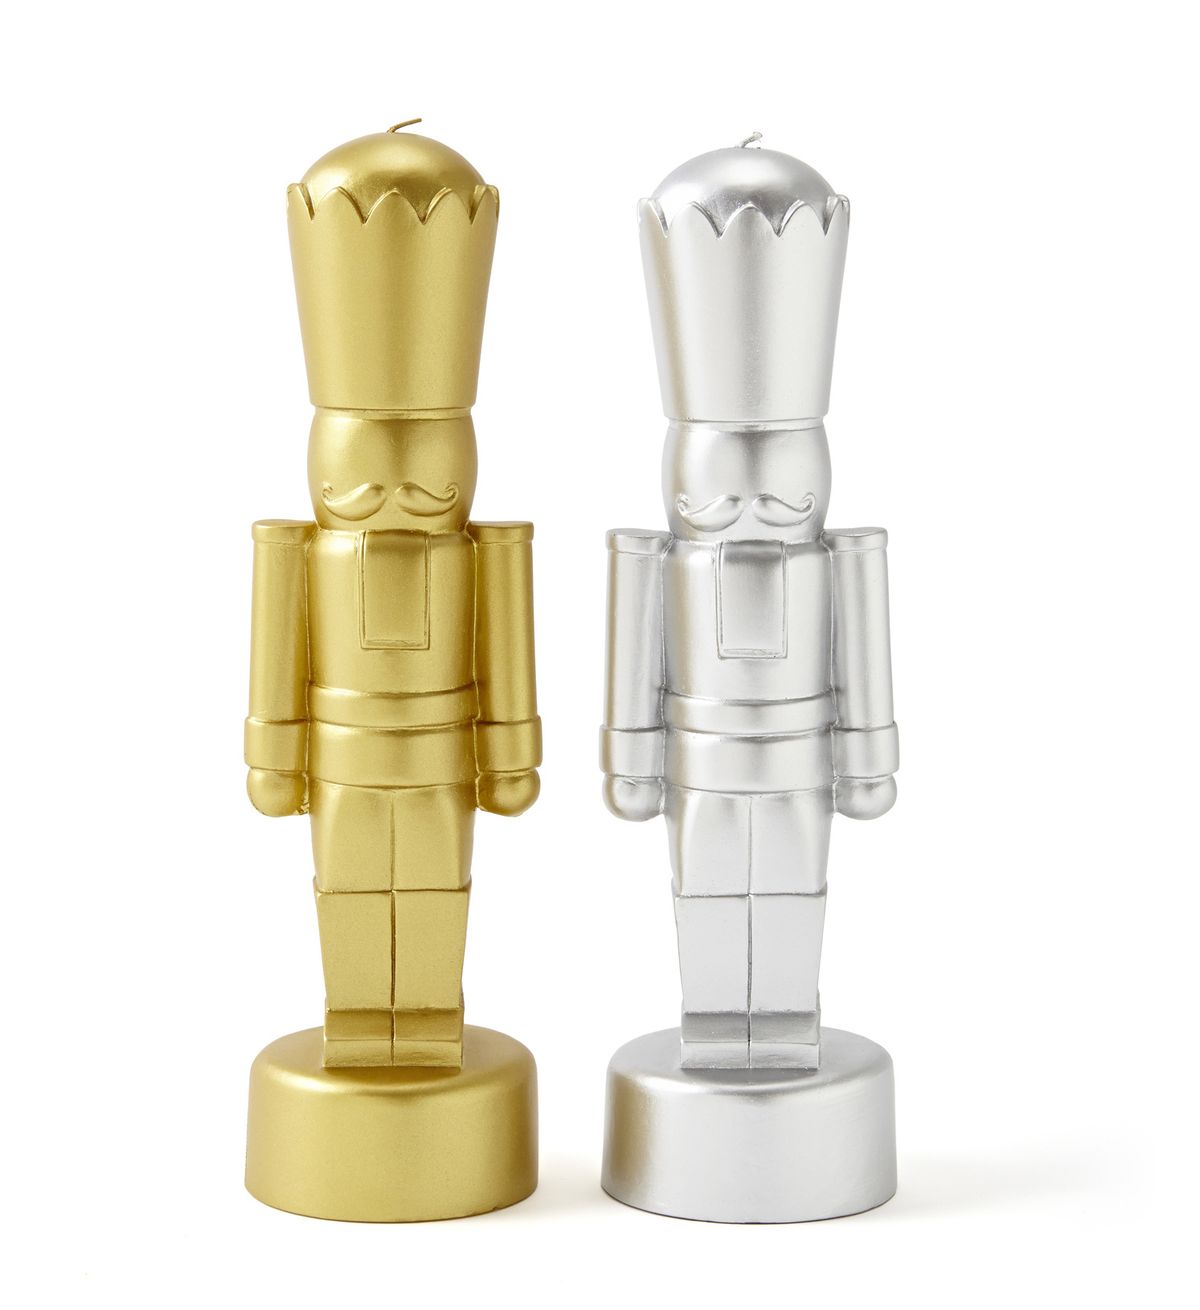 Stylized nutcrackers in gold and silver are actually candles.